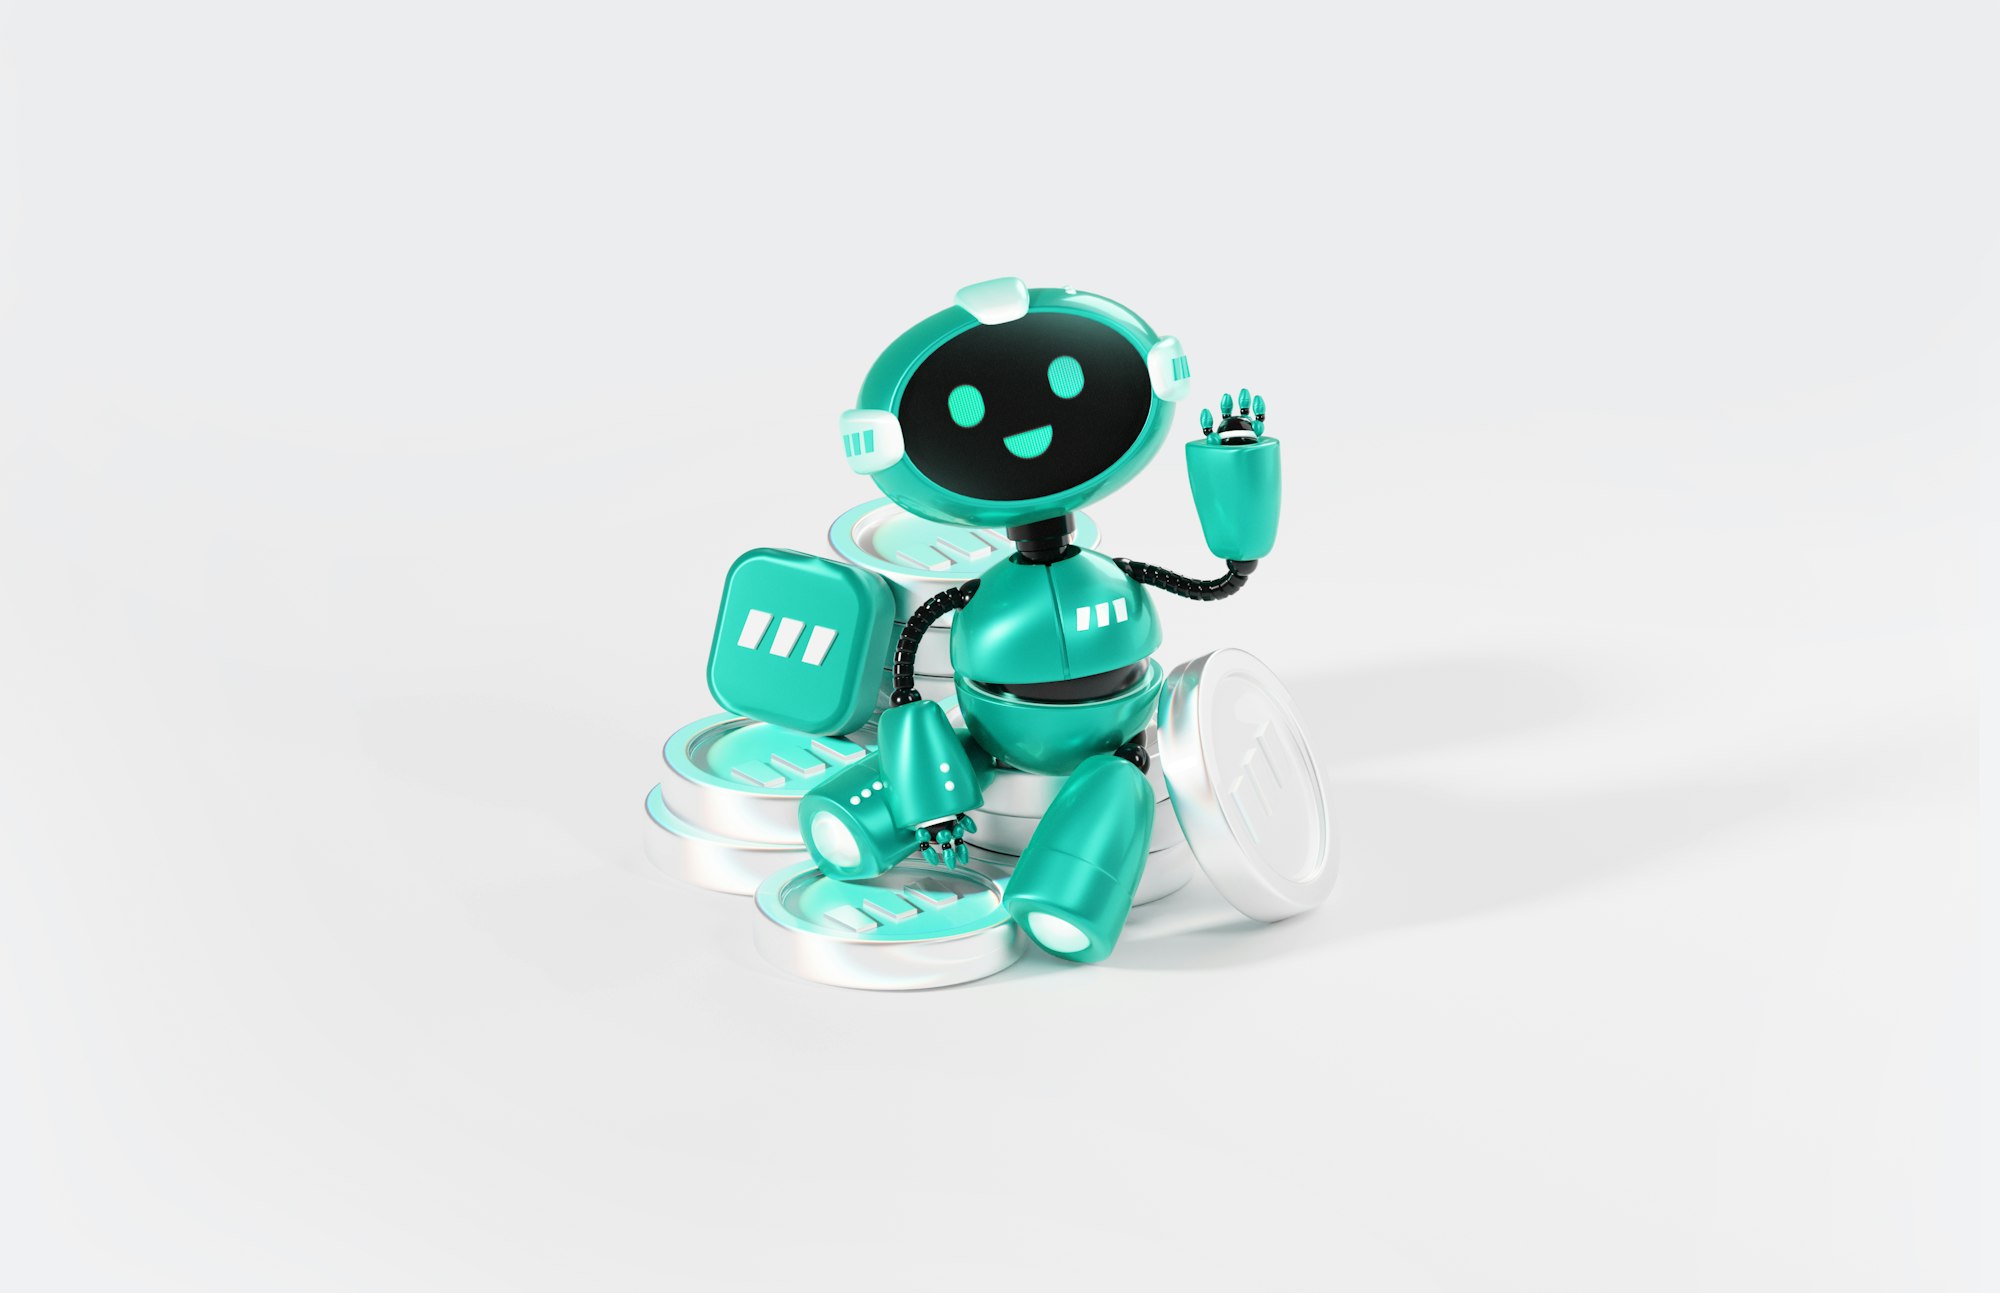 Chatbot Startup Character.AI valued at $1 billion in a new funding round